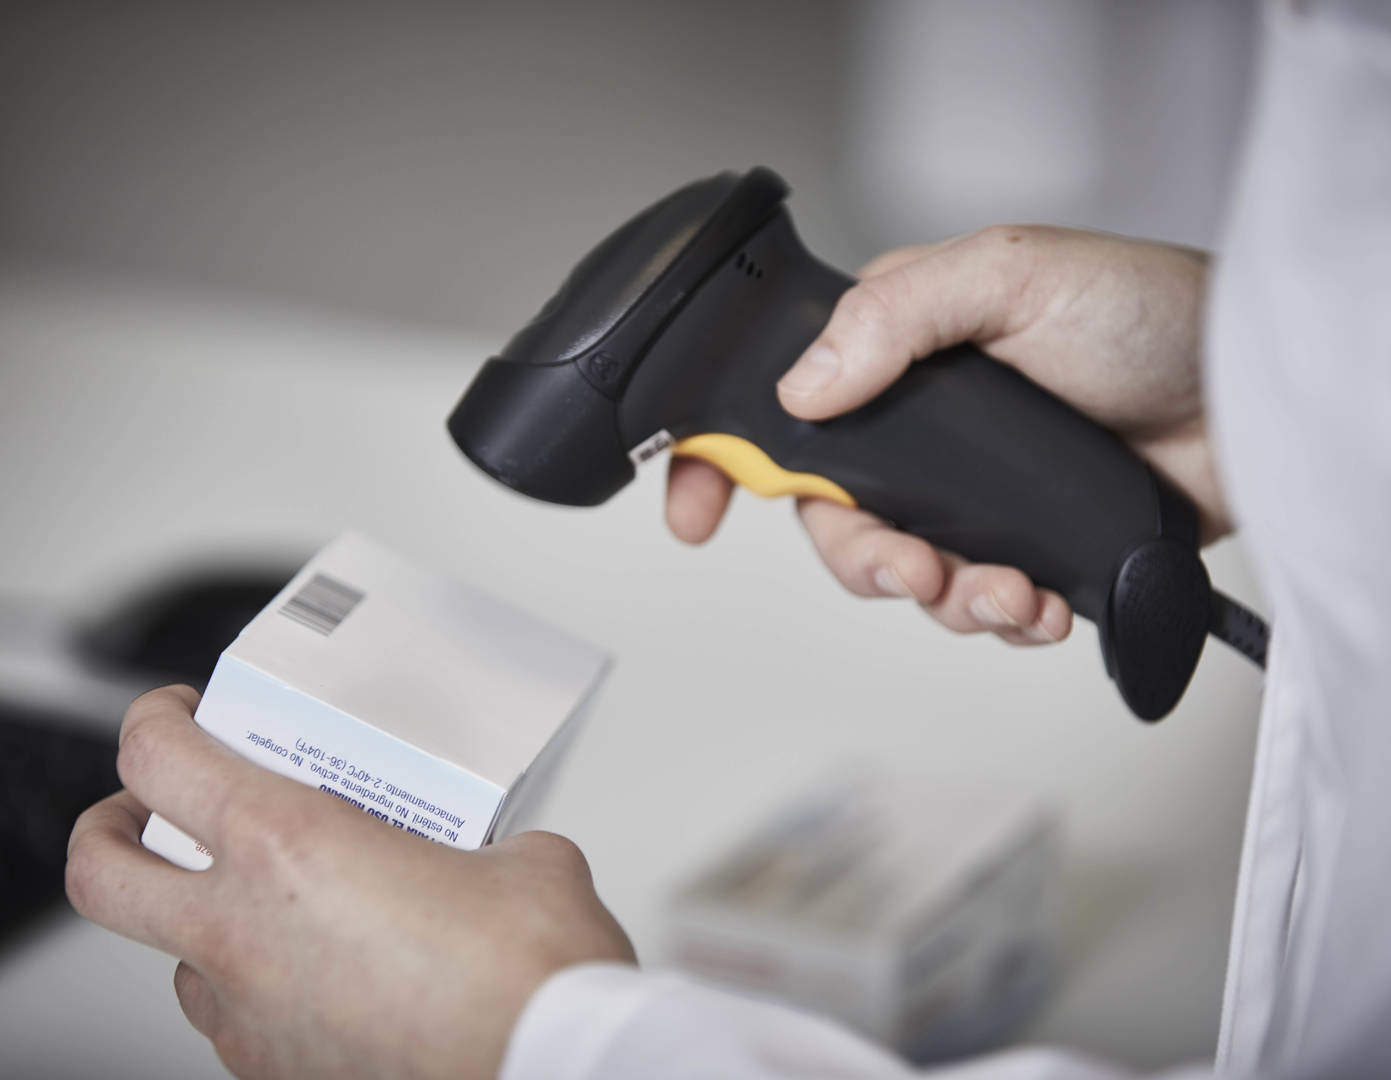 A scanner scanning a barcode on an American Health Packaging product